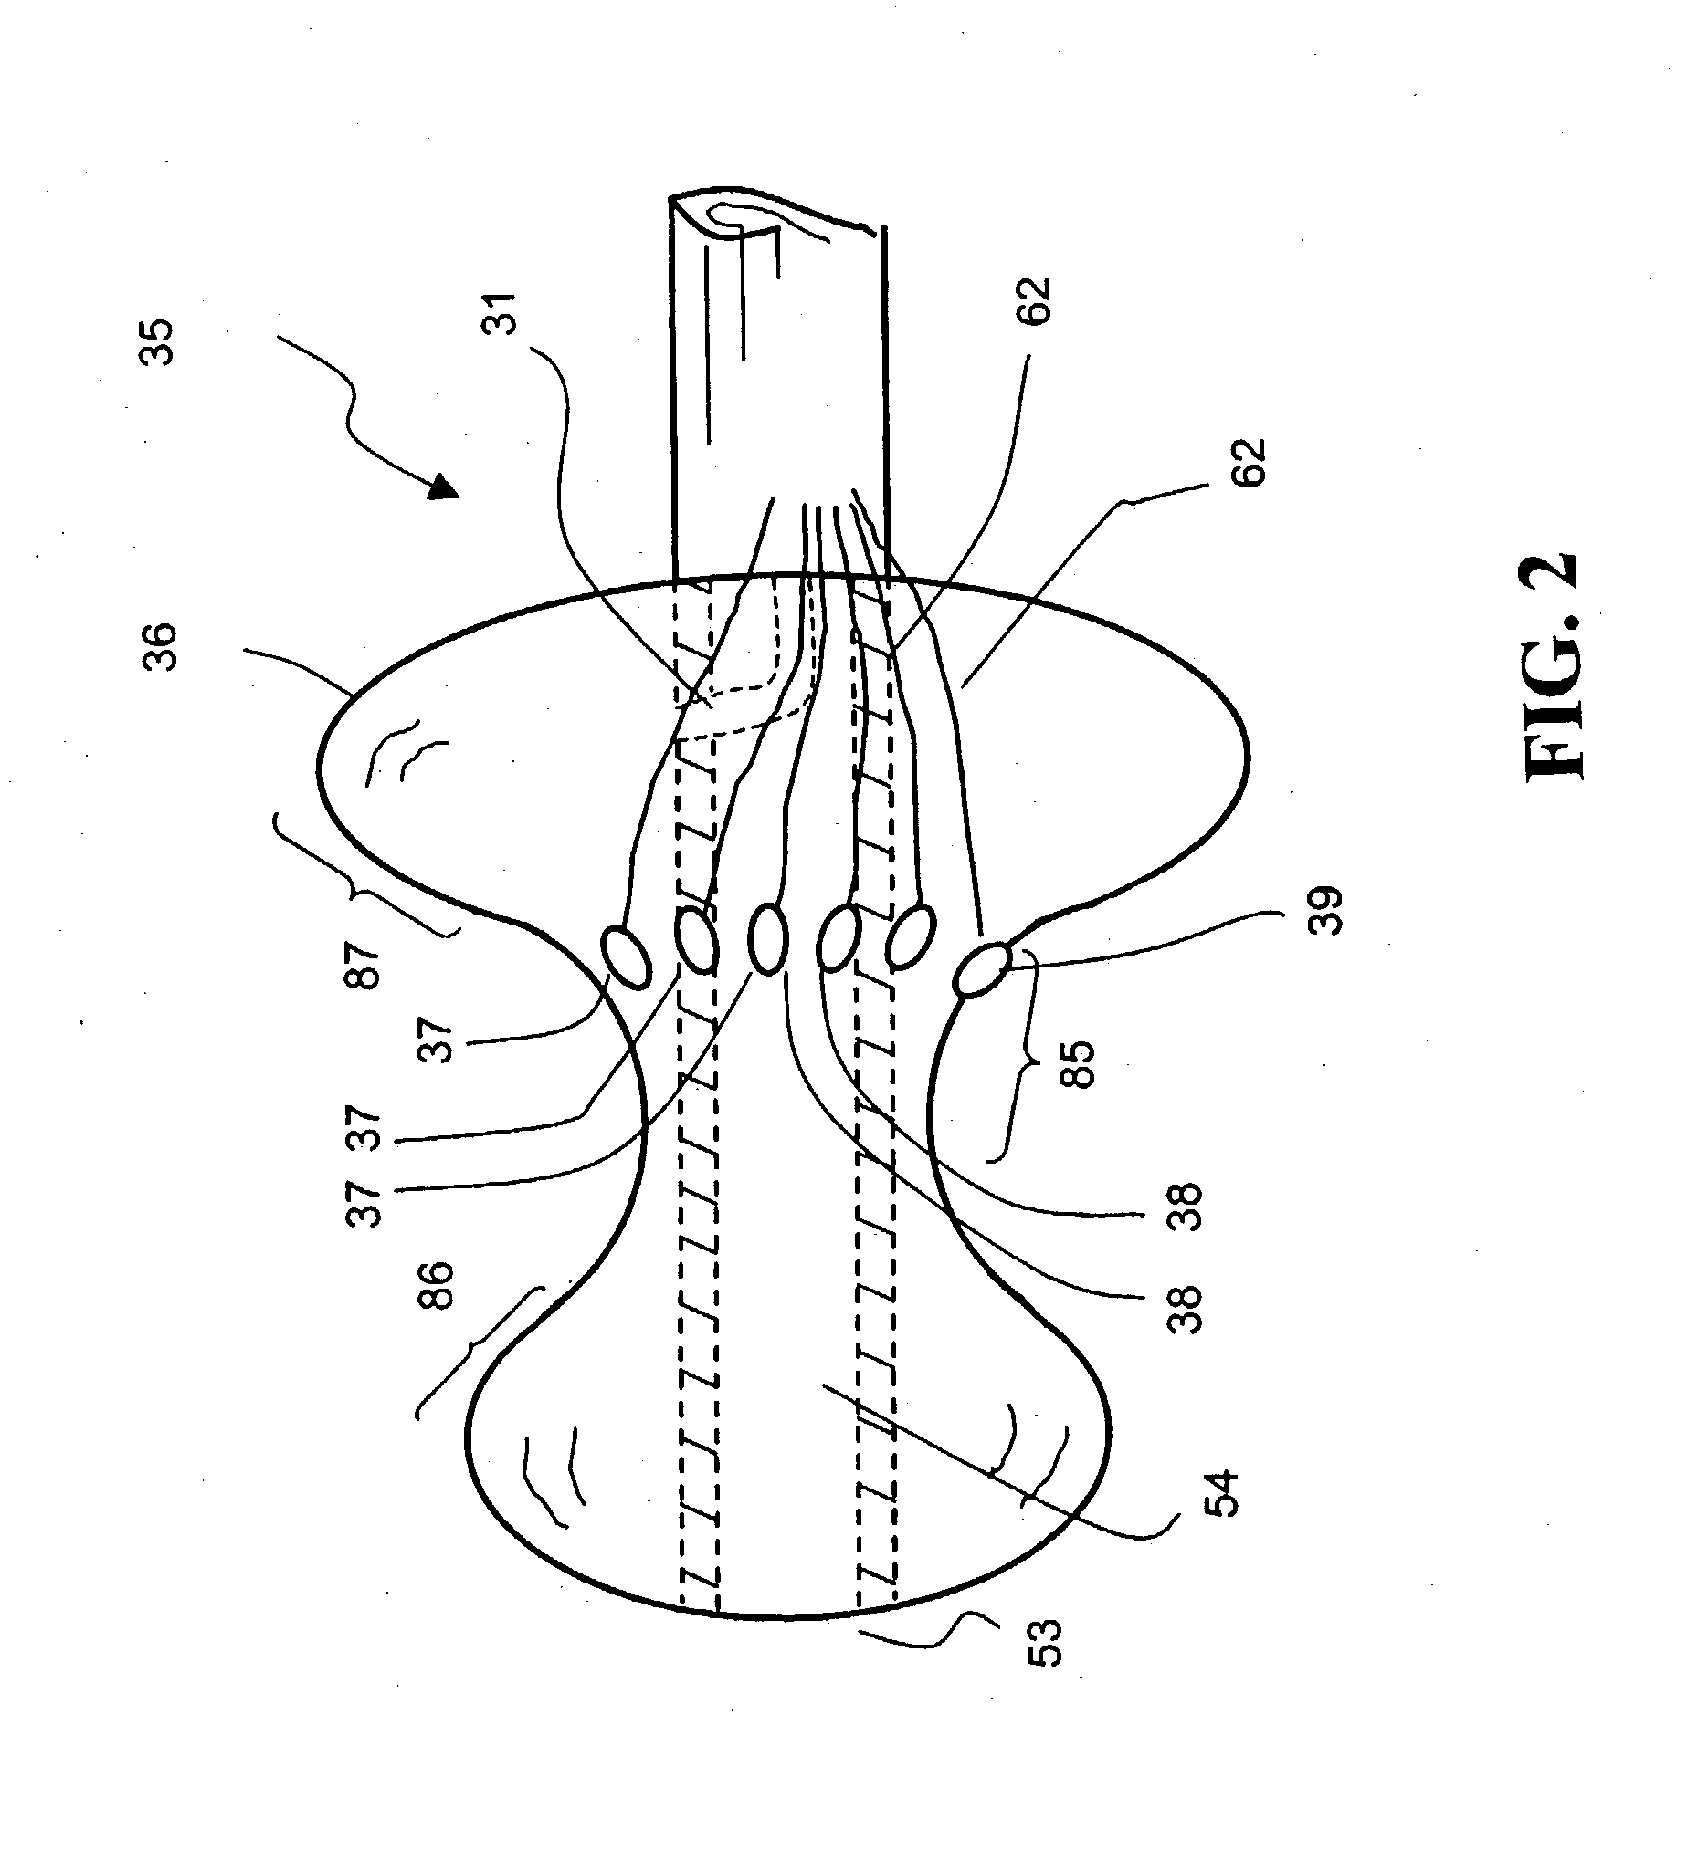 Method for treating and repairing mitral valve annulus